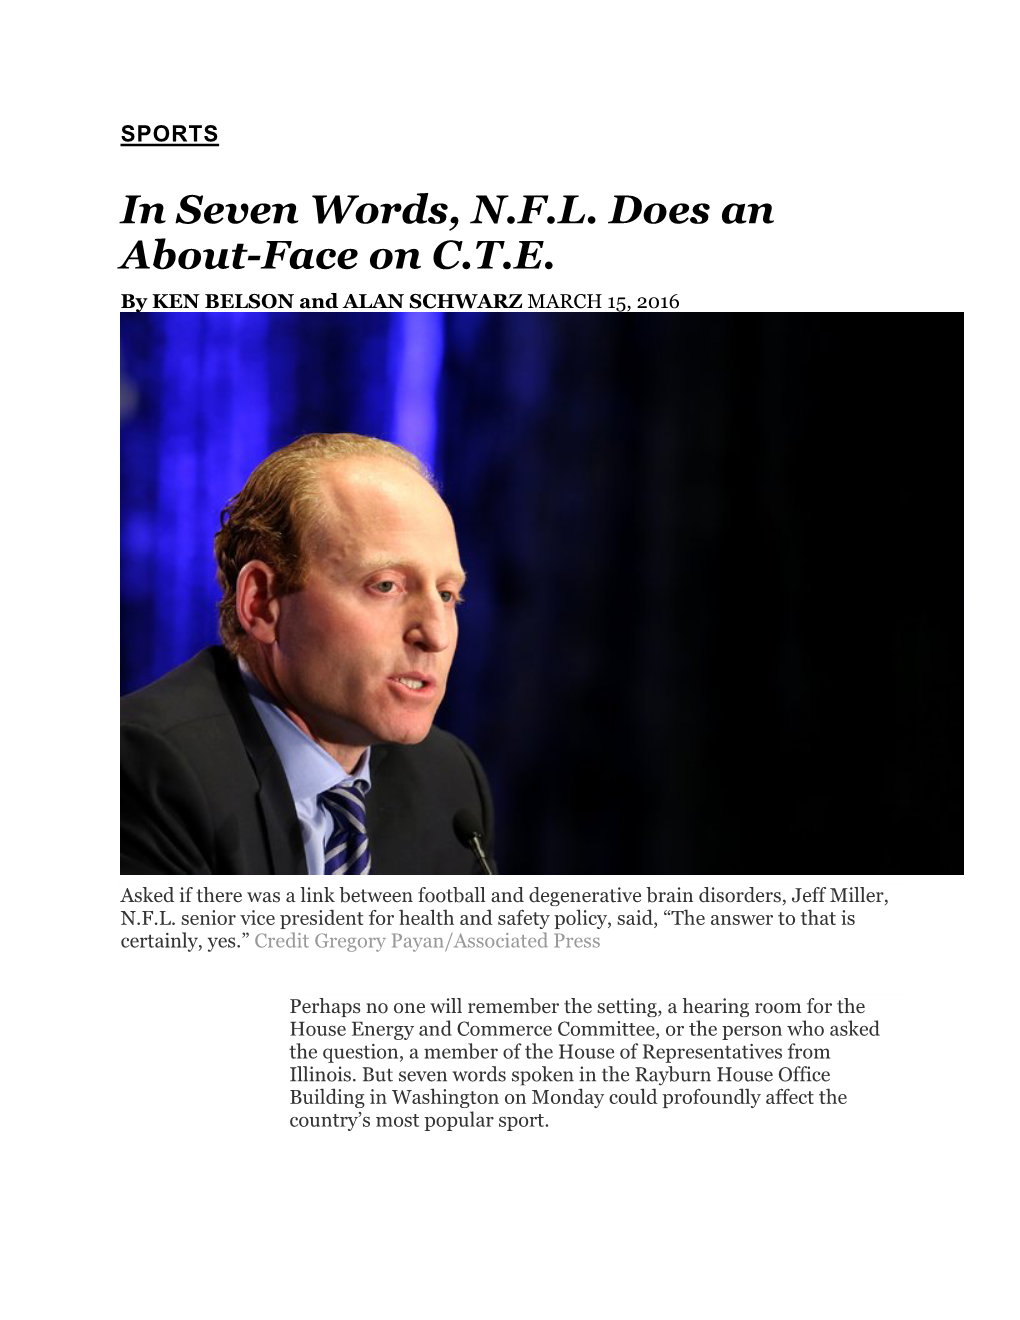 In Seven Words, N.F.L. Does an About-Face on C.T.E. by KEN BELSON and ALAN SCHWARZ MARCH 15, 2016